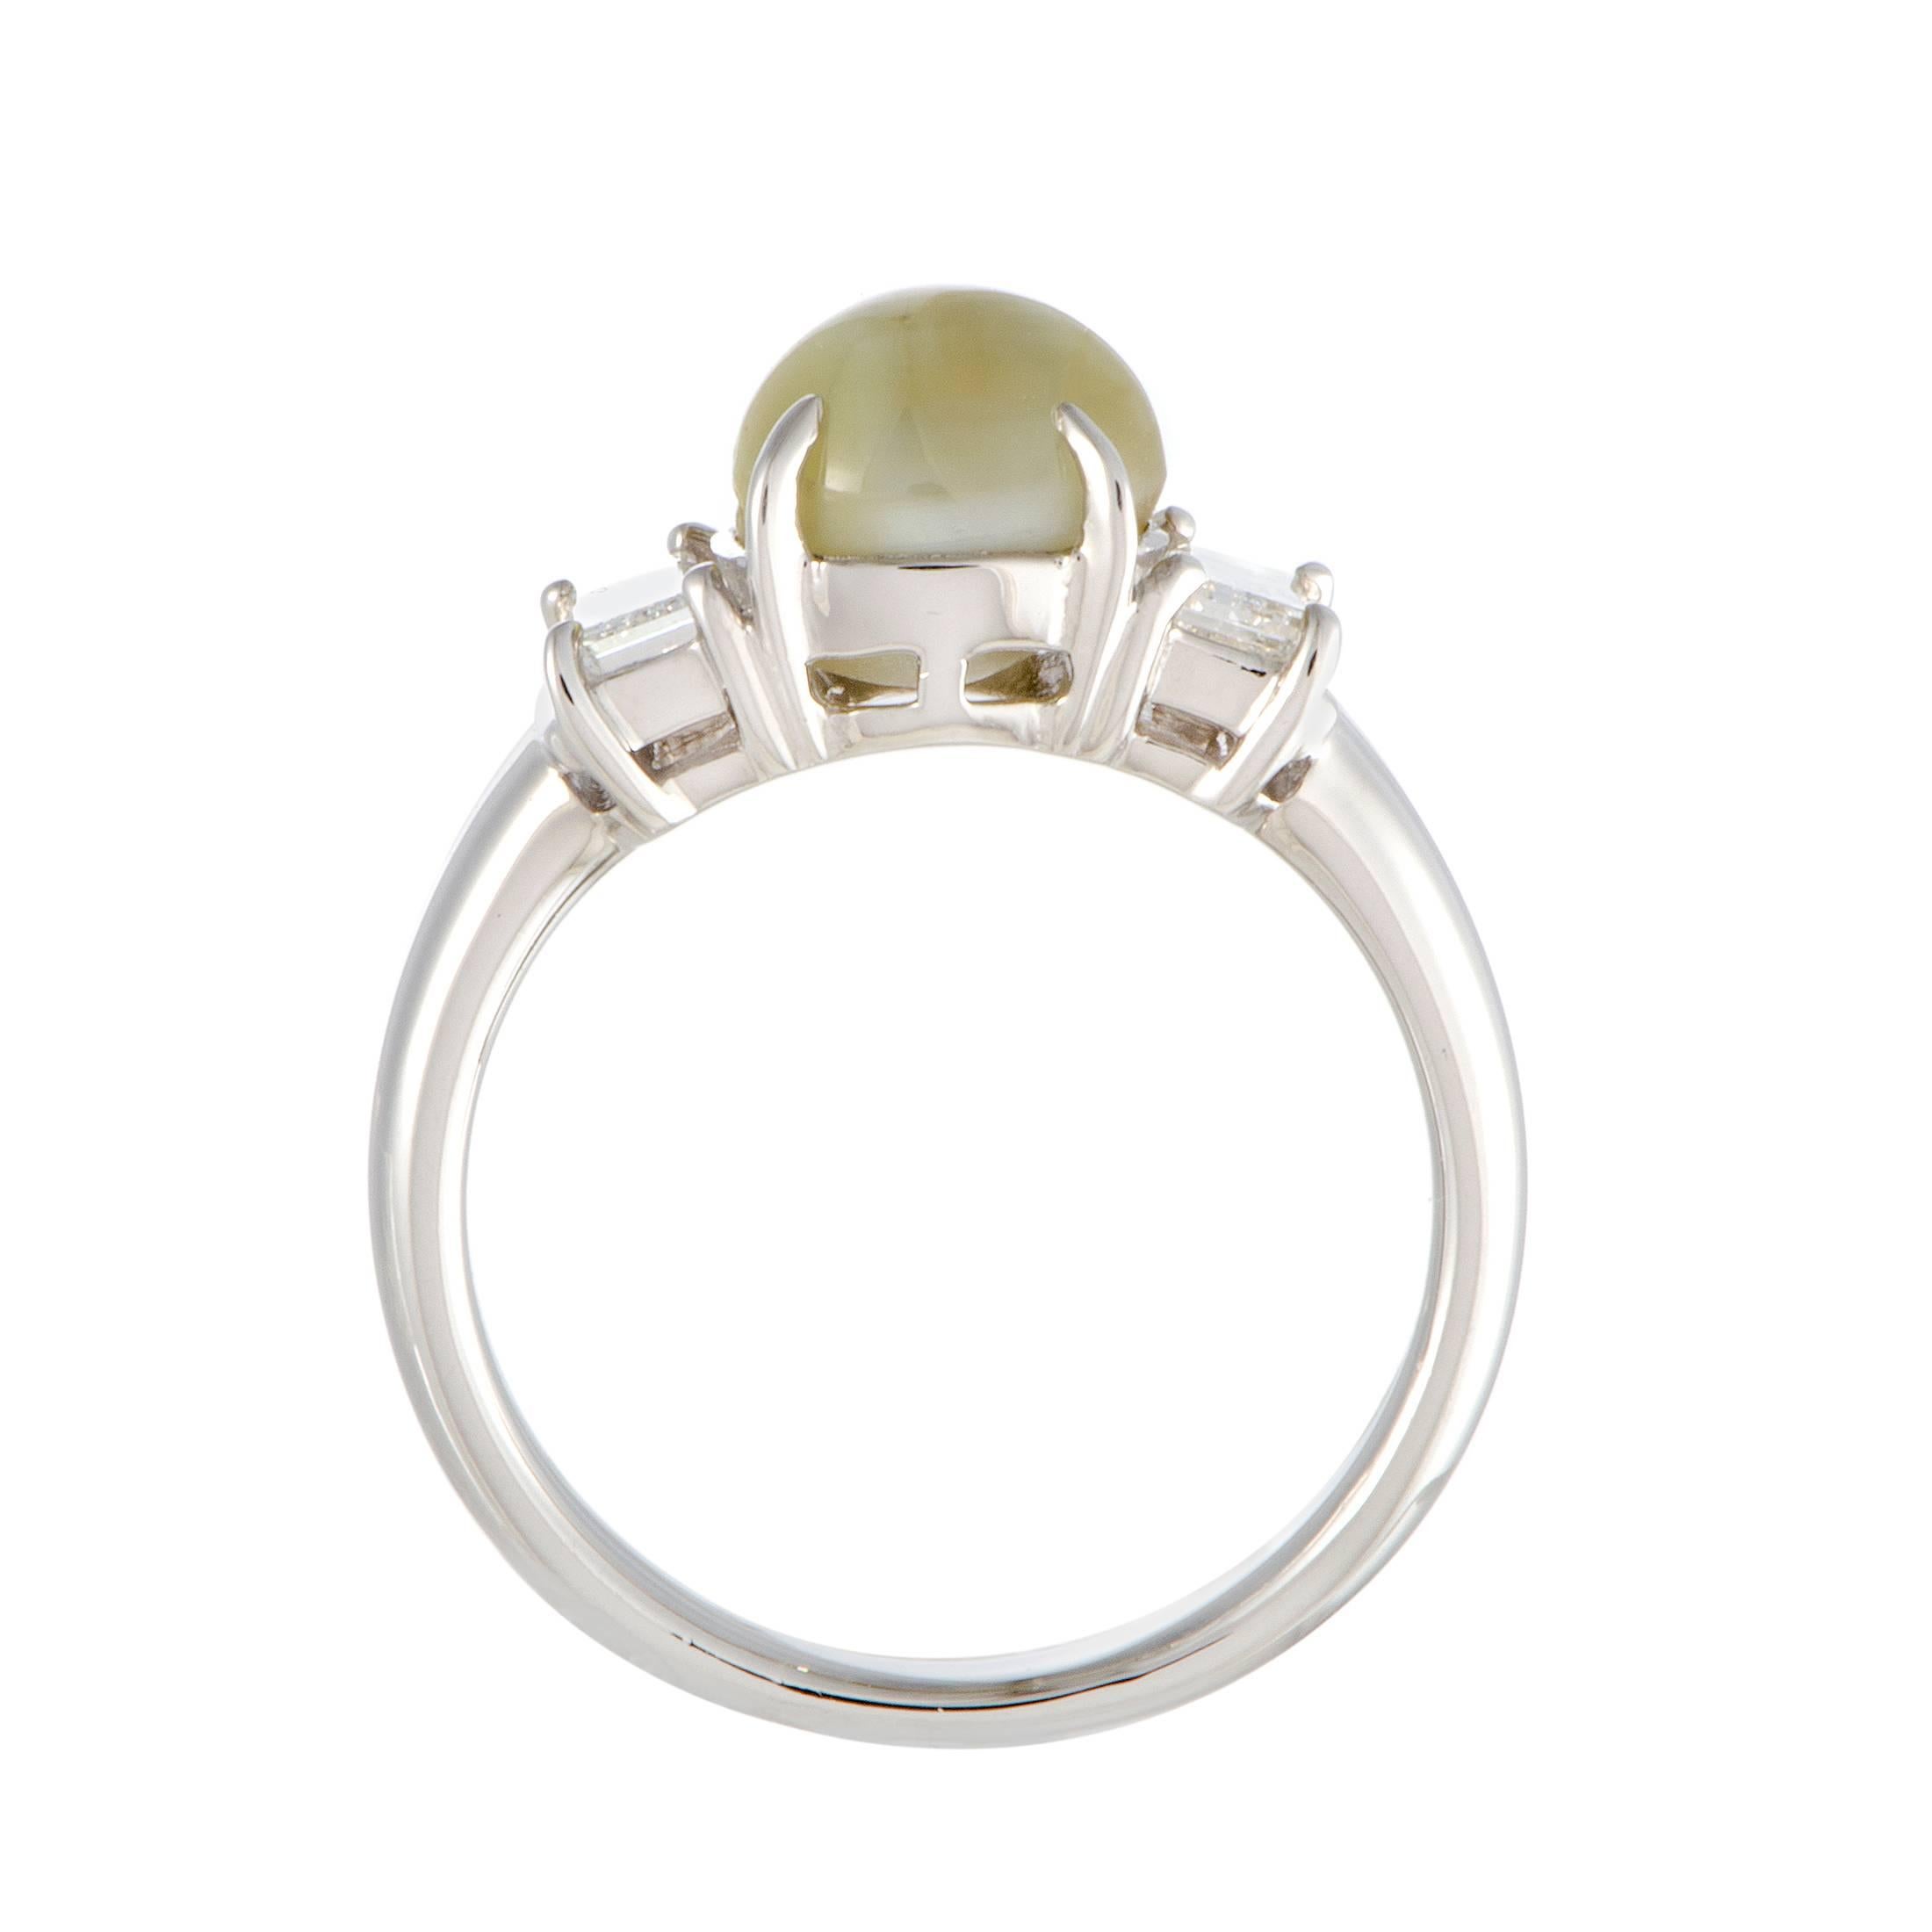 Endearingly dainty and feminine, this lovely platinum ring features elegant design and classy décor. A cat’s eye that weighs 3.70 carats is the central stone, accompanied by diamonds totaling 0.50 carats.
Ring Size: 6.75
Ring Top Dimensions: 7mm x